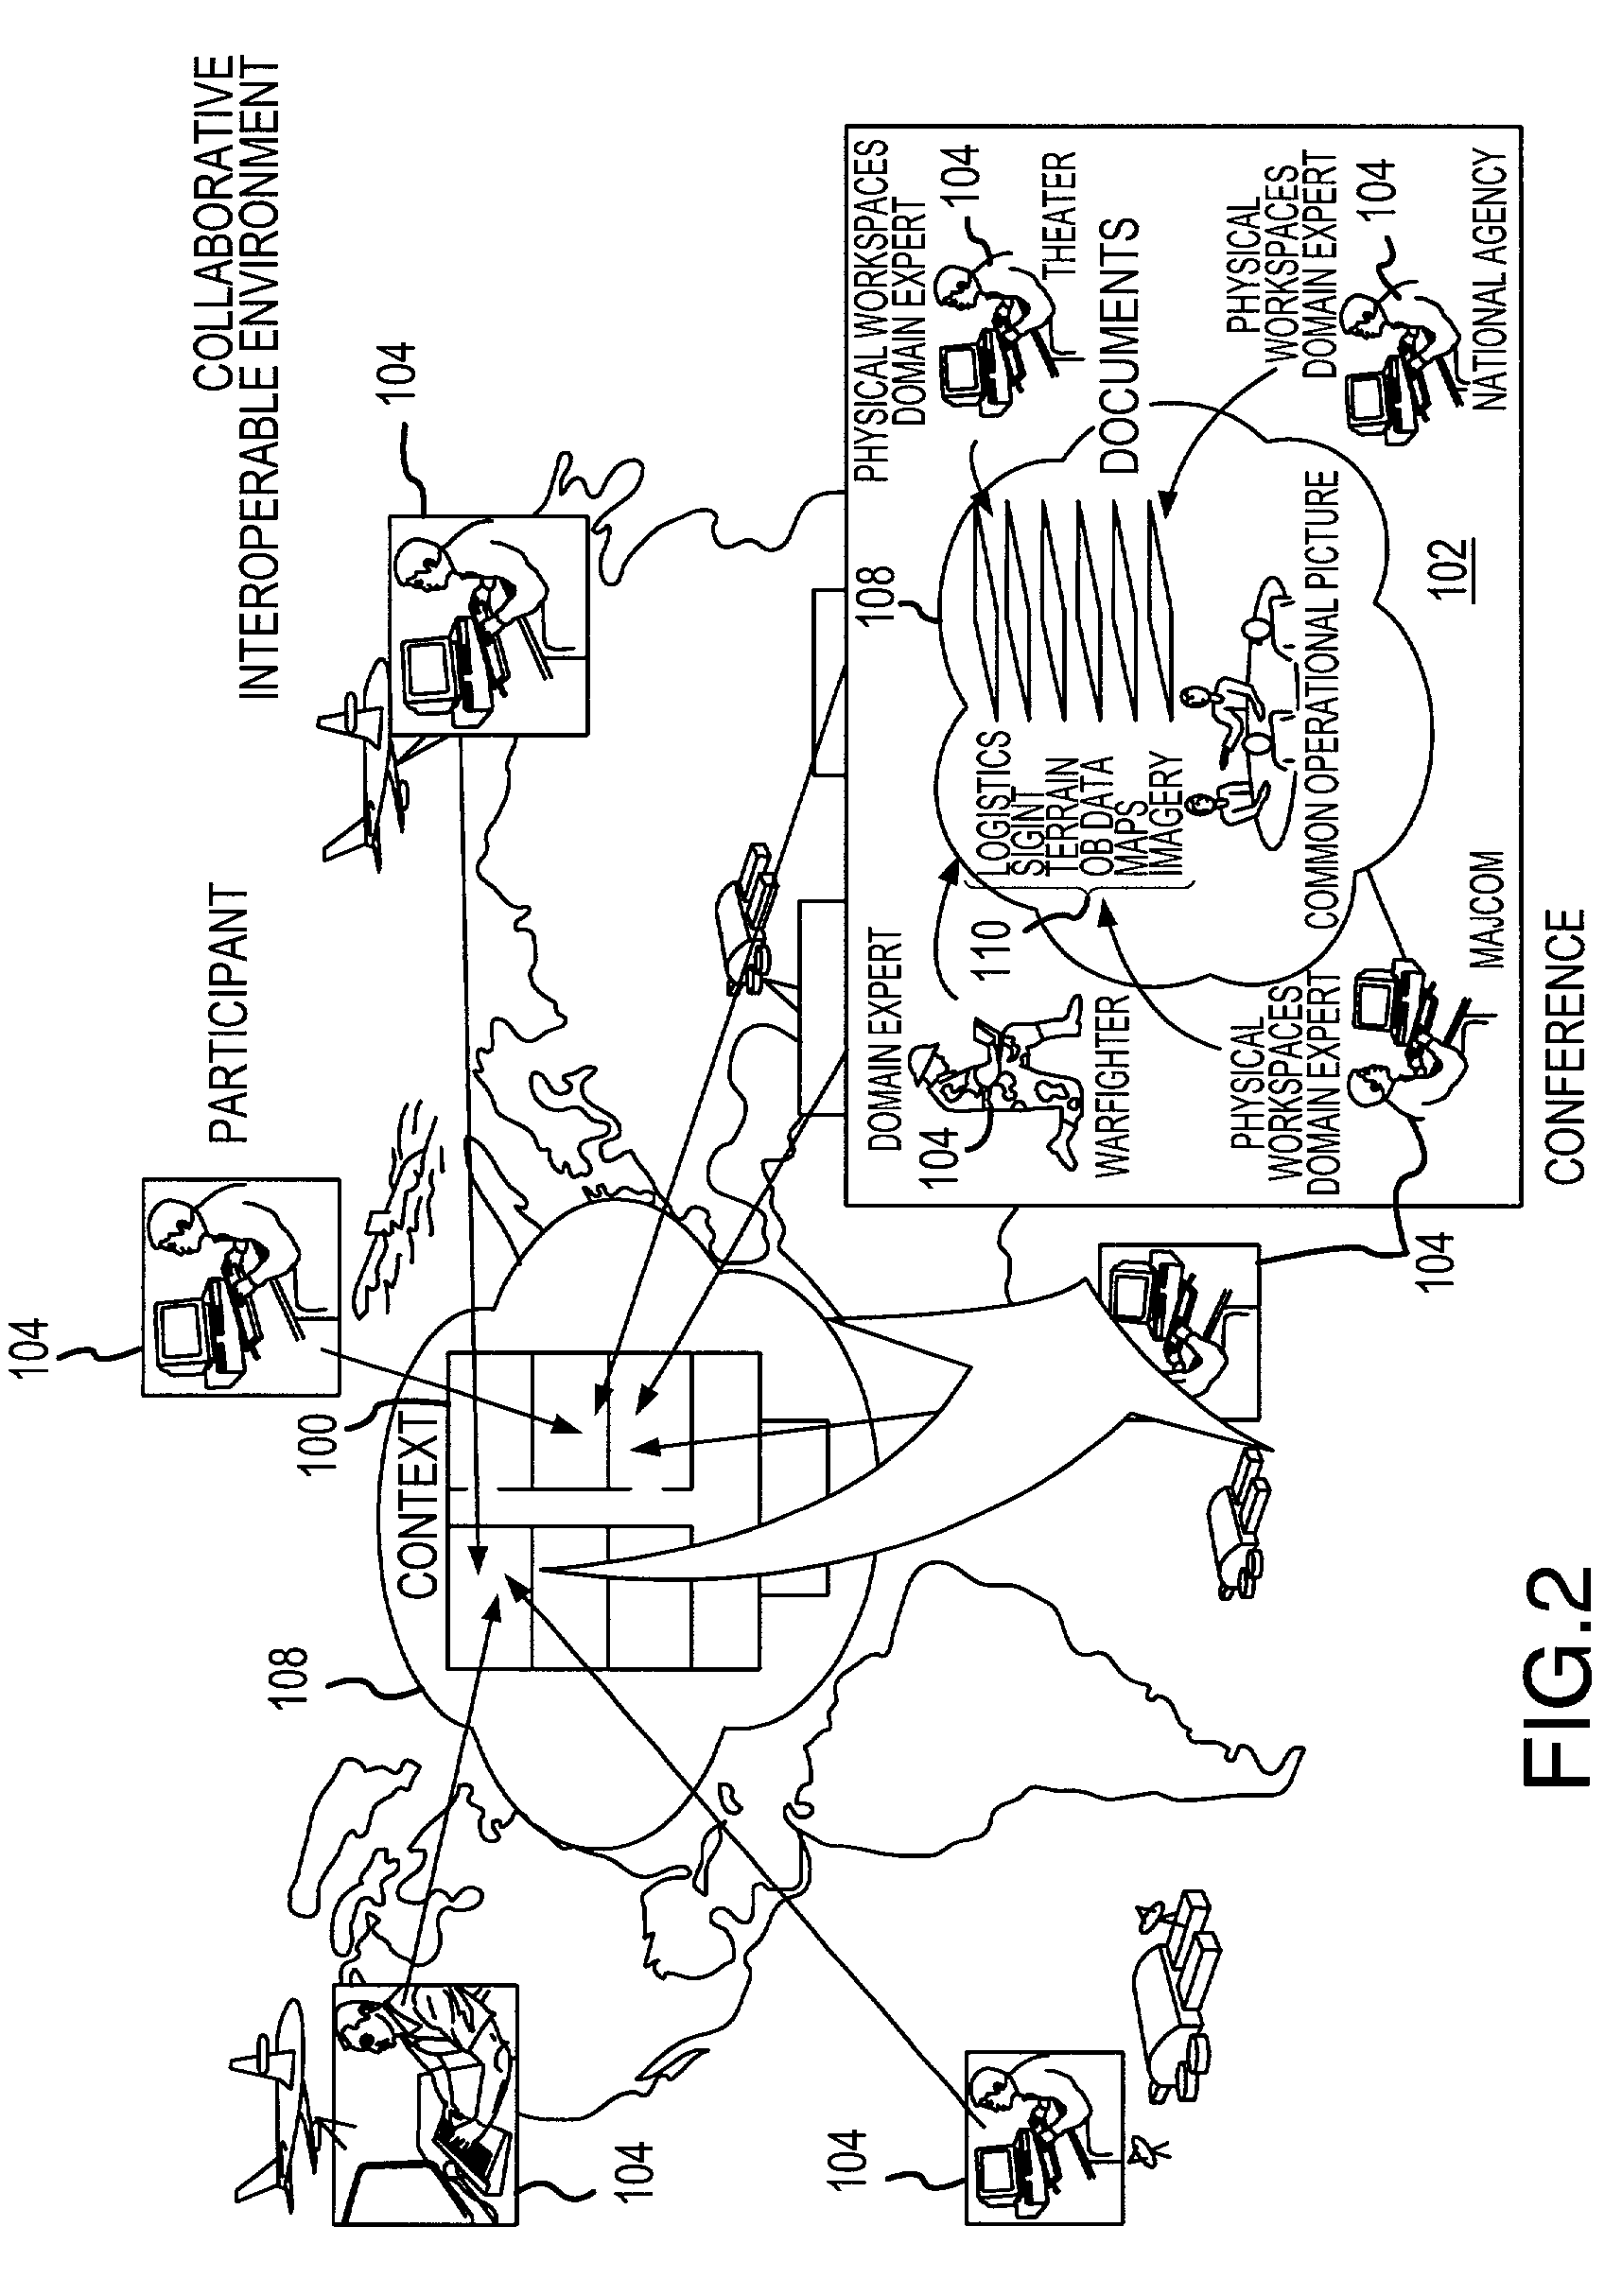 Information access, collaboration and integration system and method